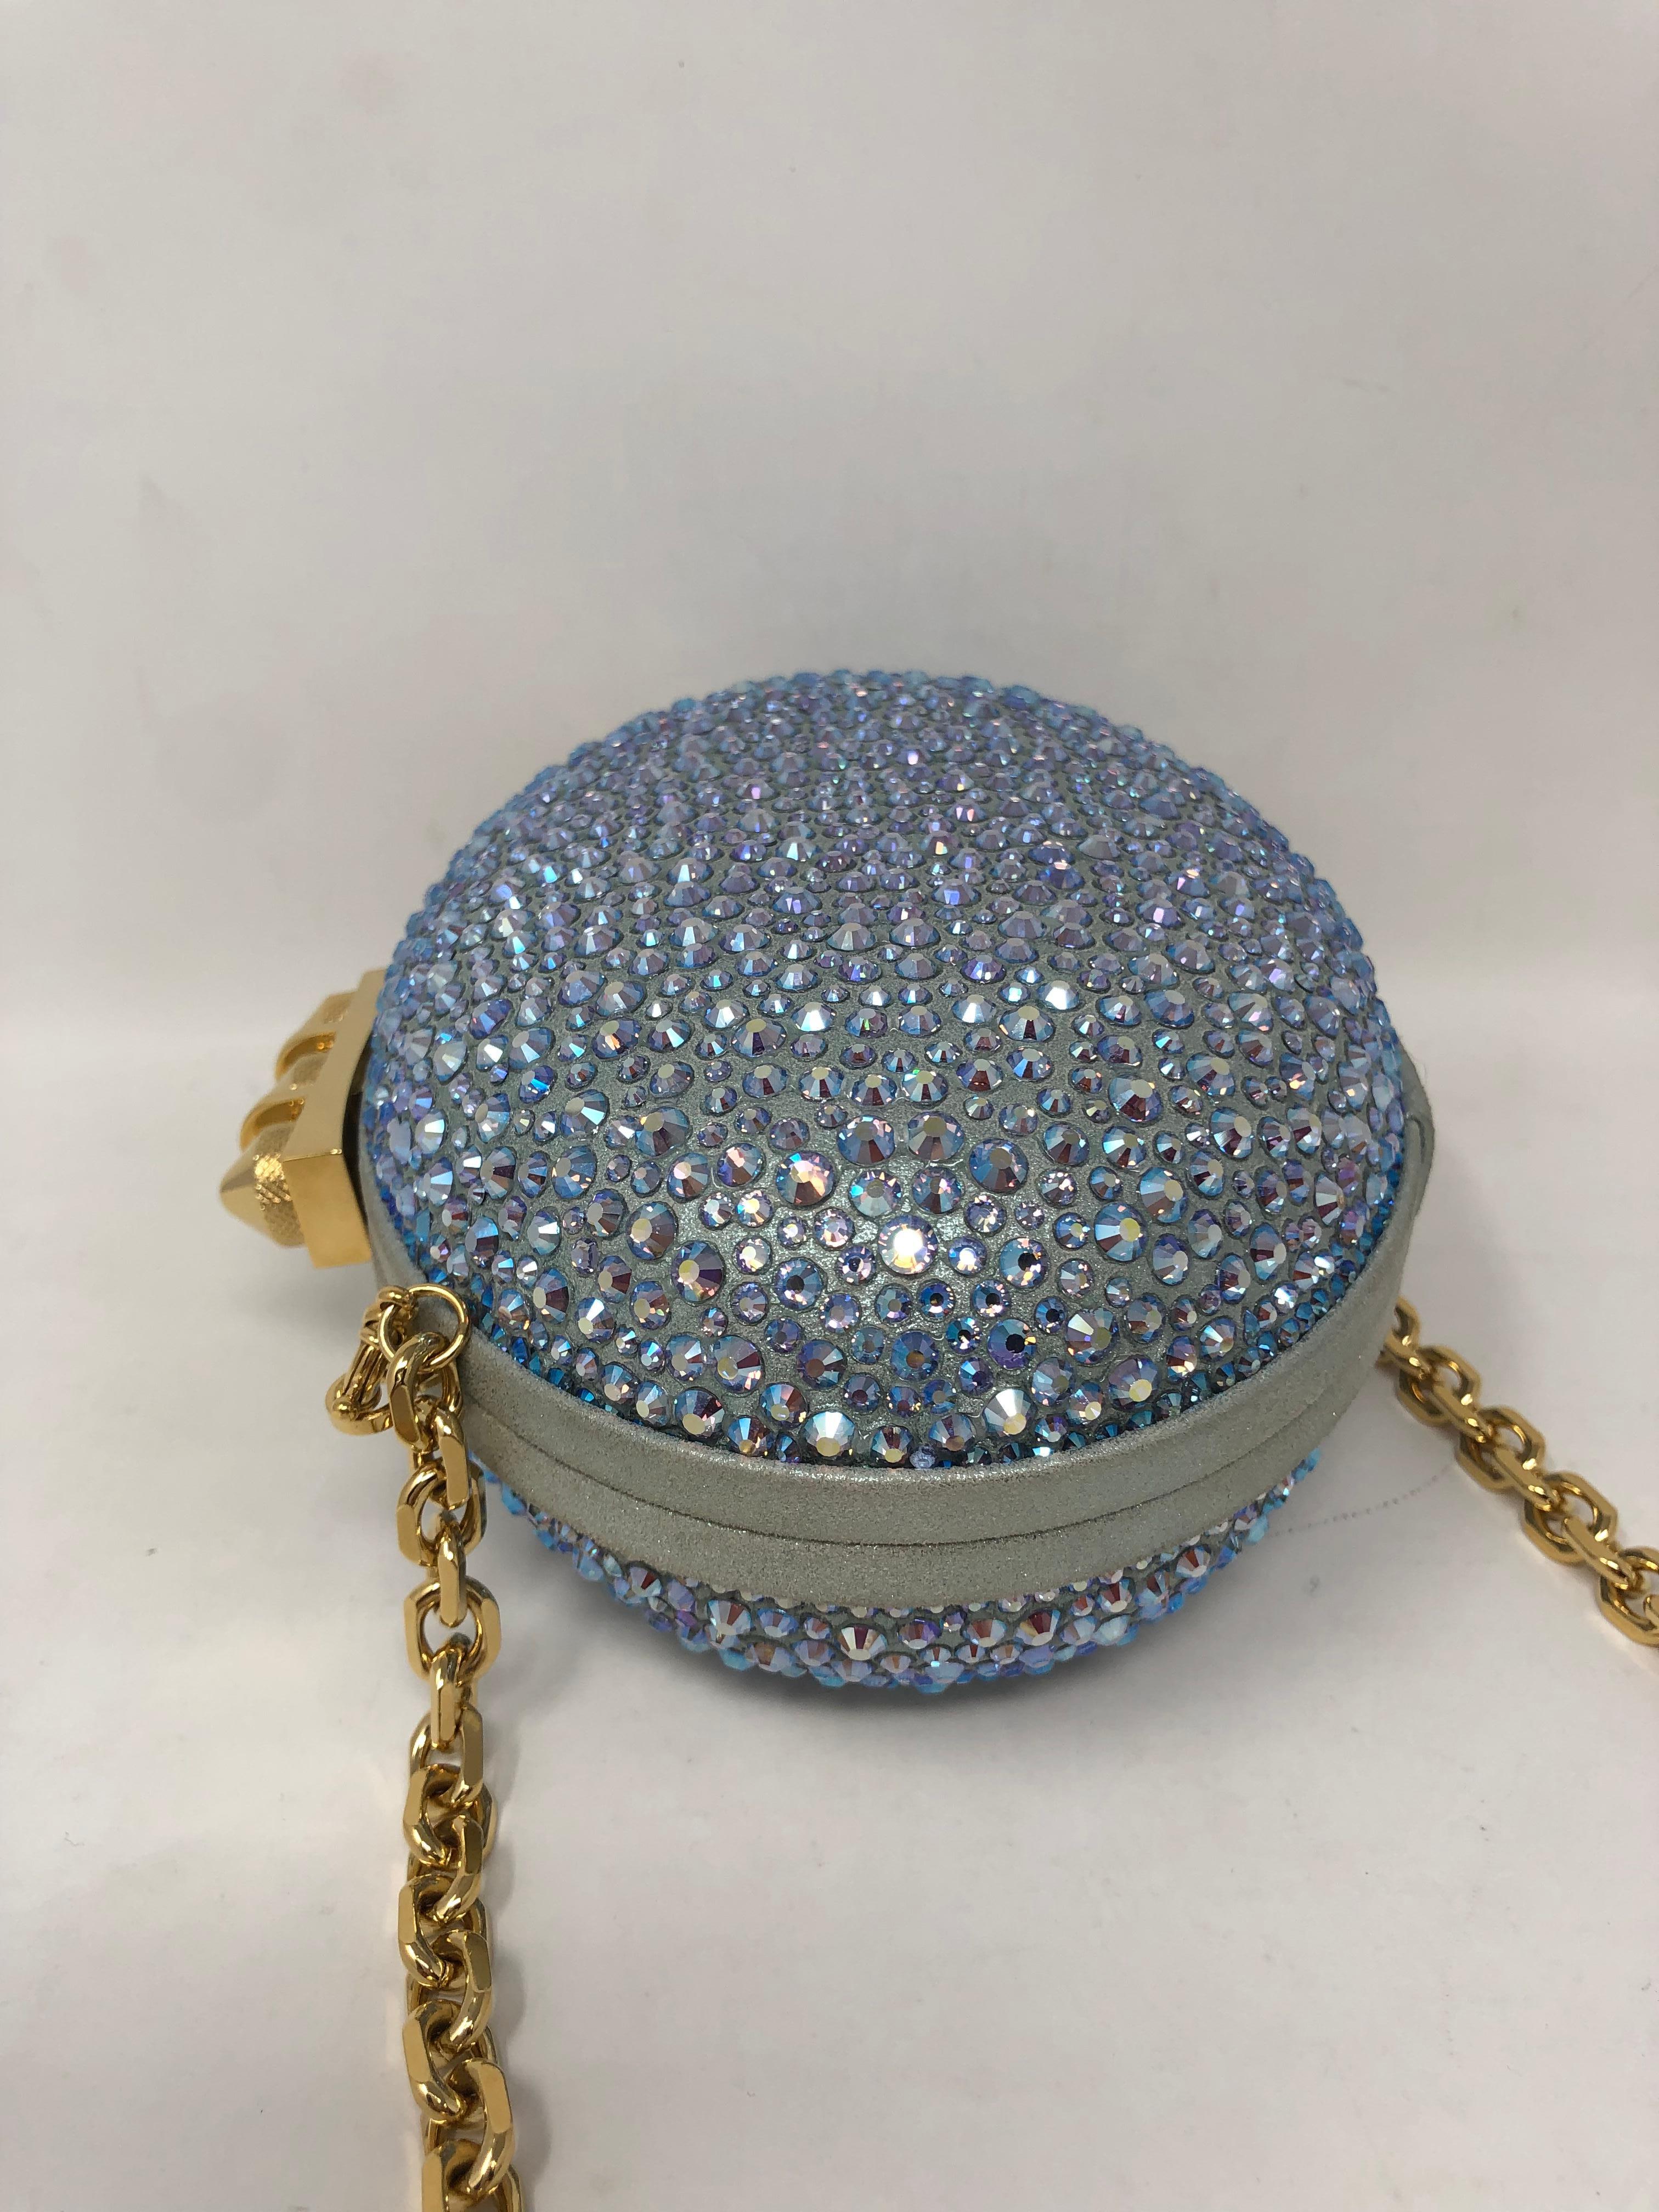 Christian Loubutin Mina Swarovski Nubuck Crystal-embellished Metallic Blue Nubuck Clutch. Brand new and never used. Stunning evening bag. Gold hardware. Be the life of the party. Guaranteed authentic. 